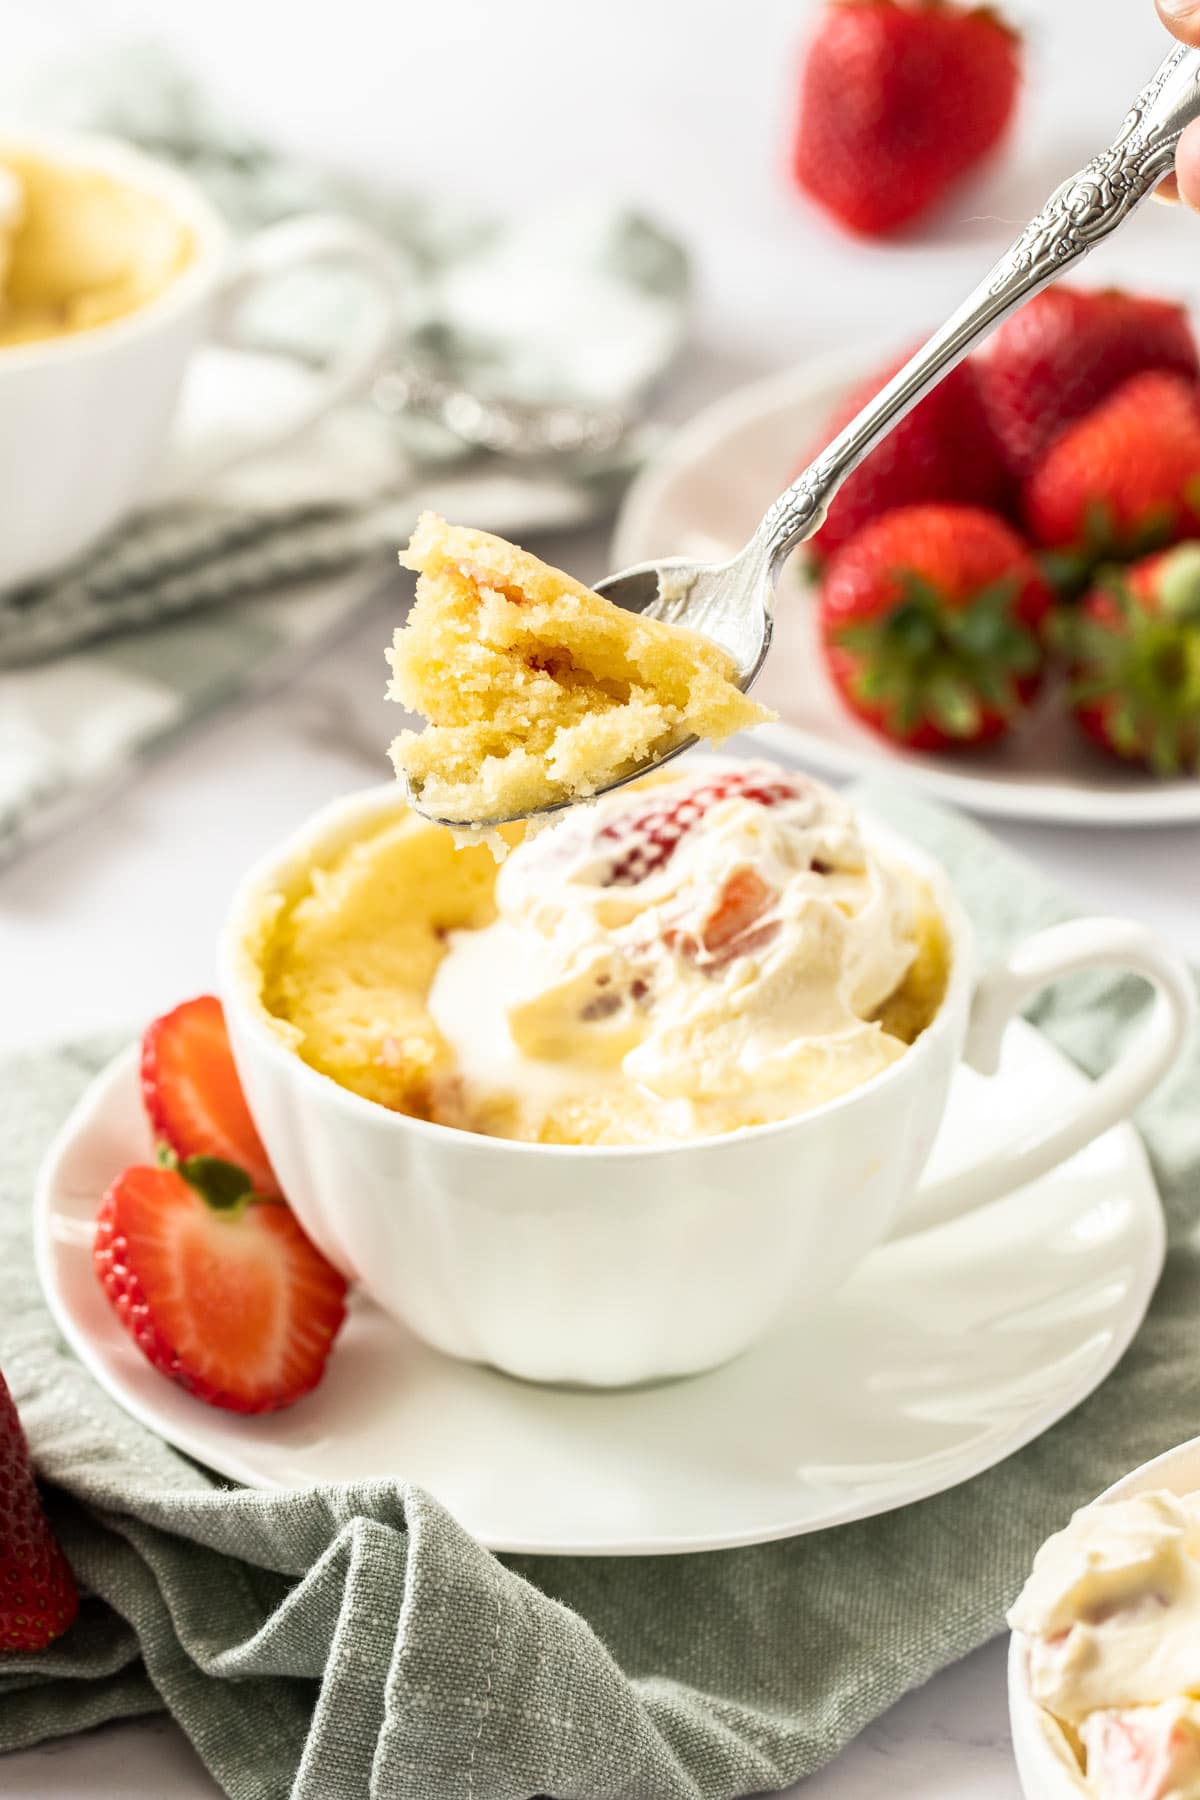 A spoonful of strawberry shortcake in a mug with the mug cake in the background.